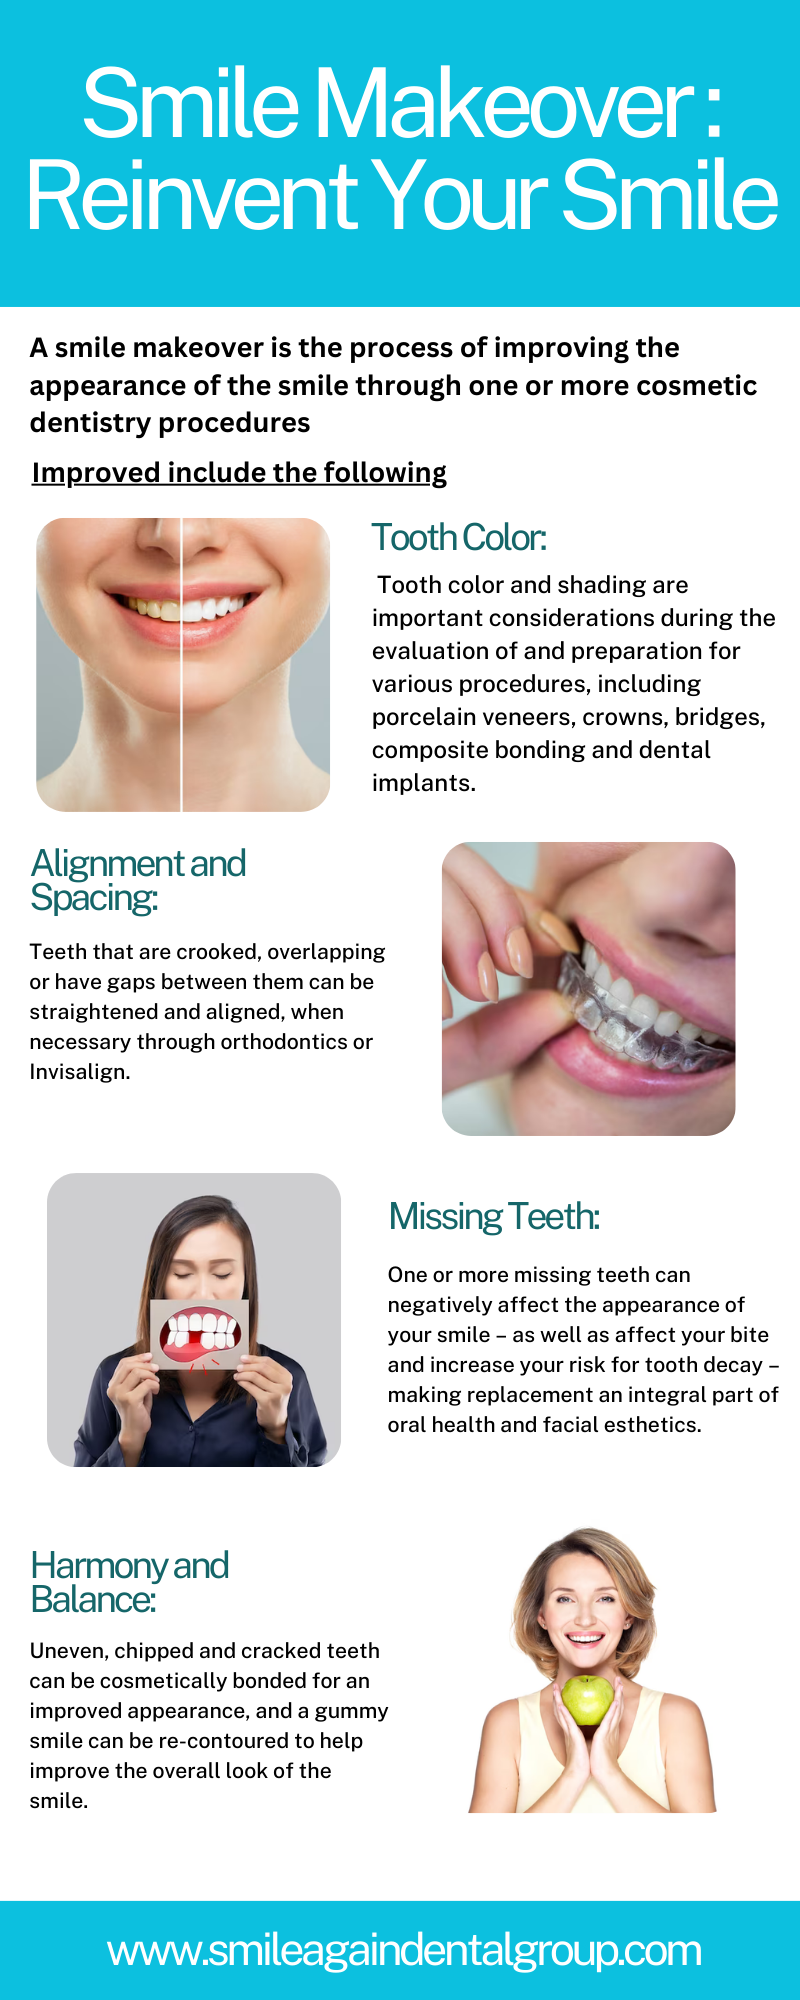 Reinvent your smile with Smile Again Dental Group